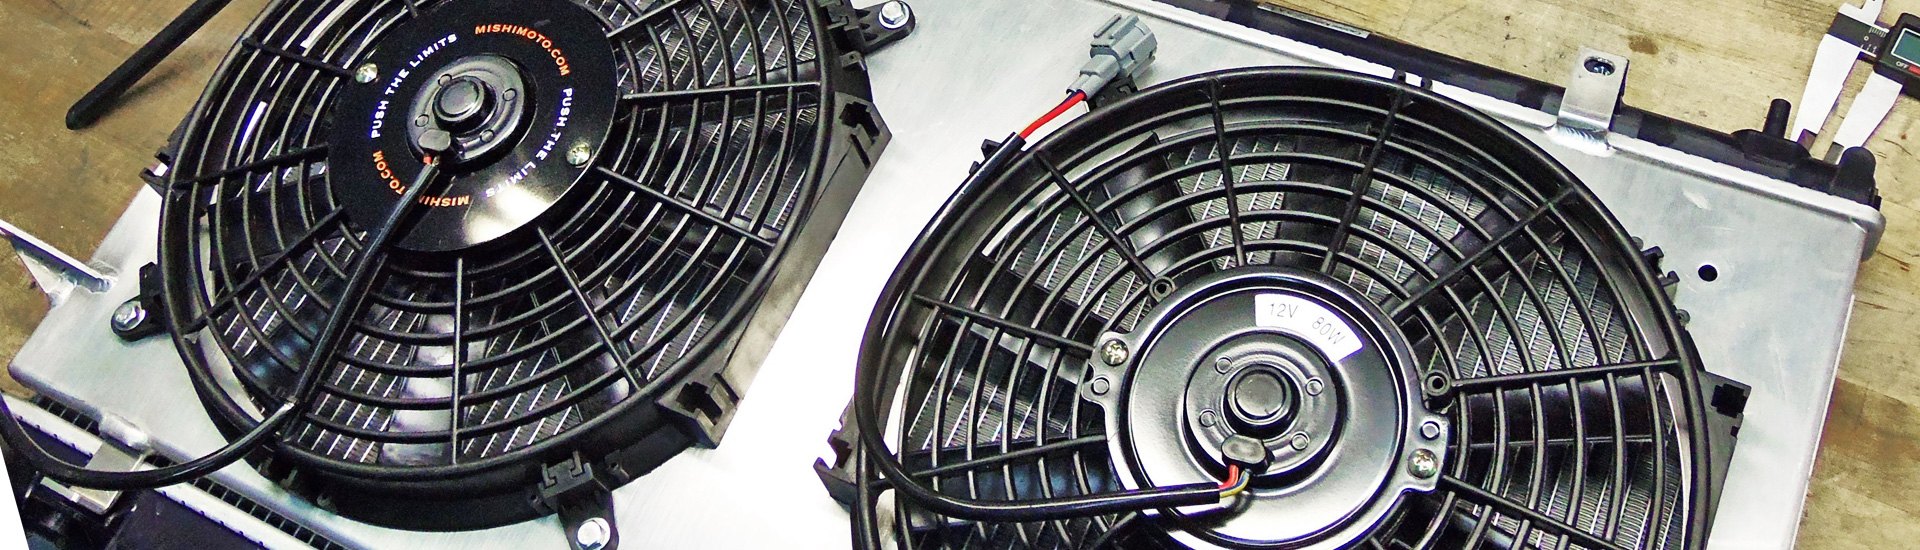 Performance Cooling Fans: How To Measure, How To Install